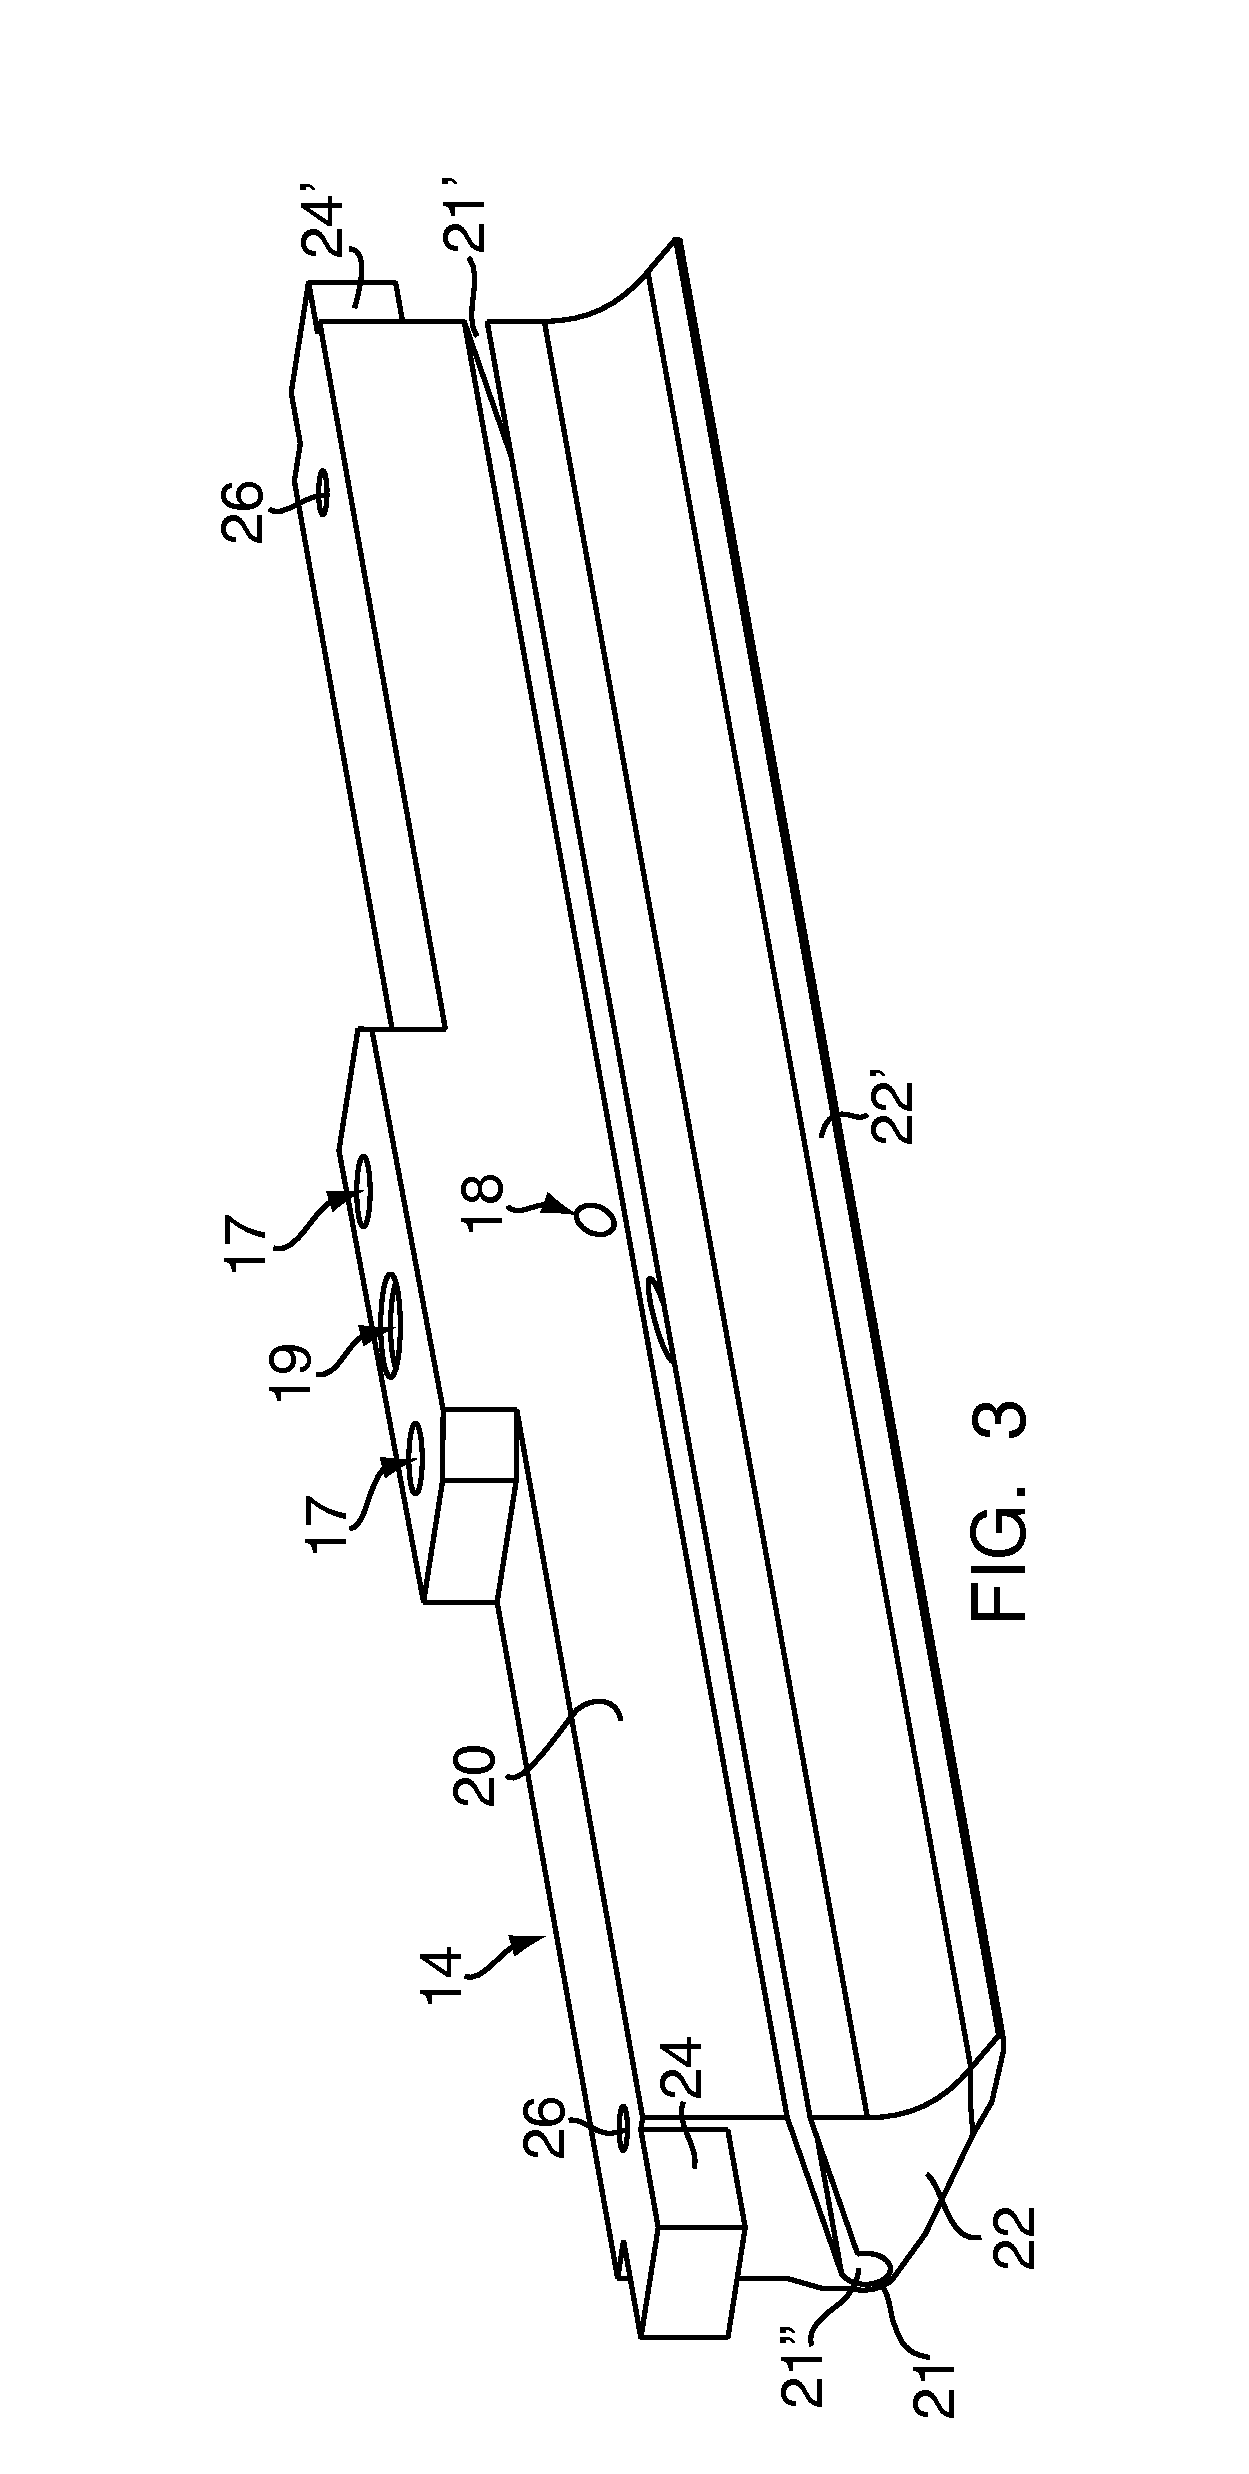 Pre-rounding element on a rounding apparatus